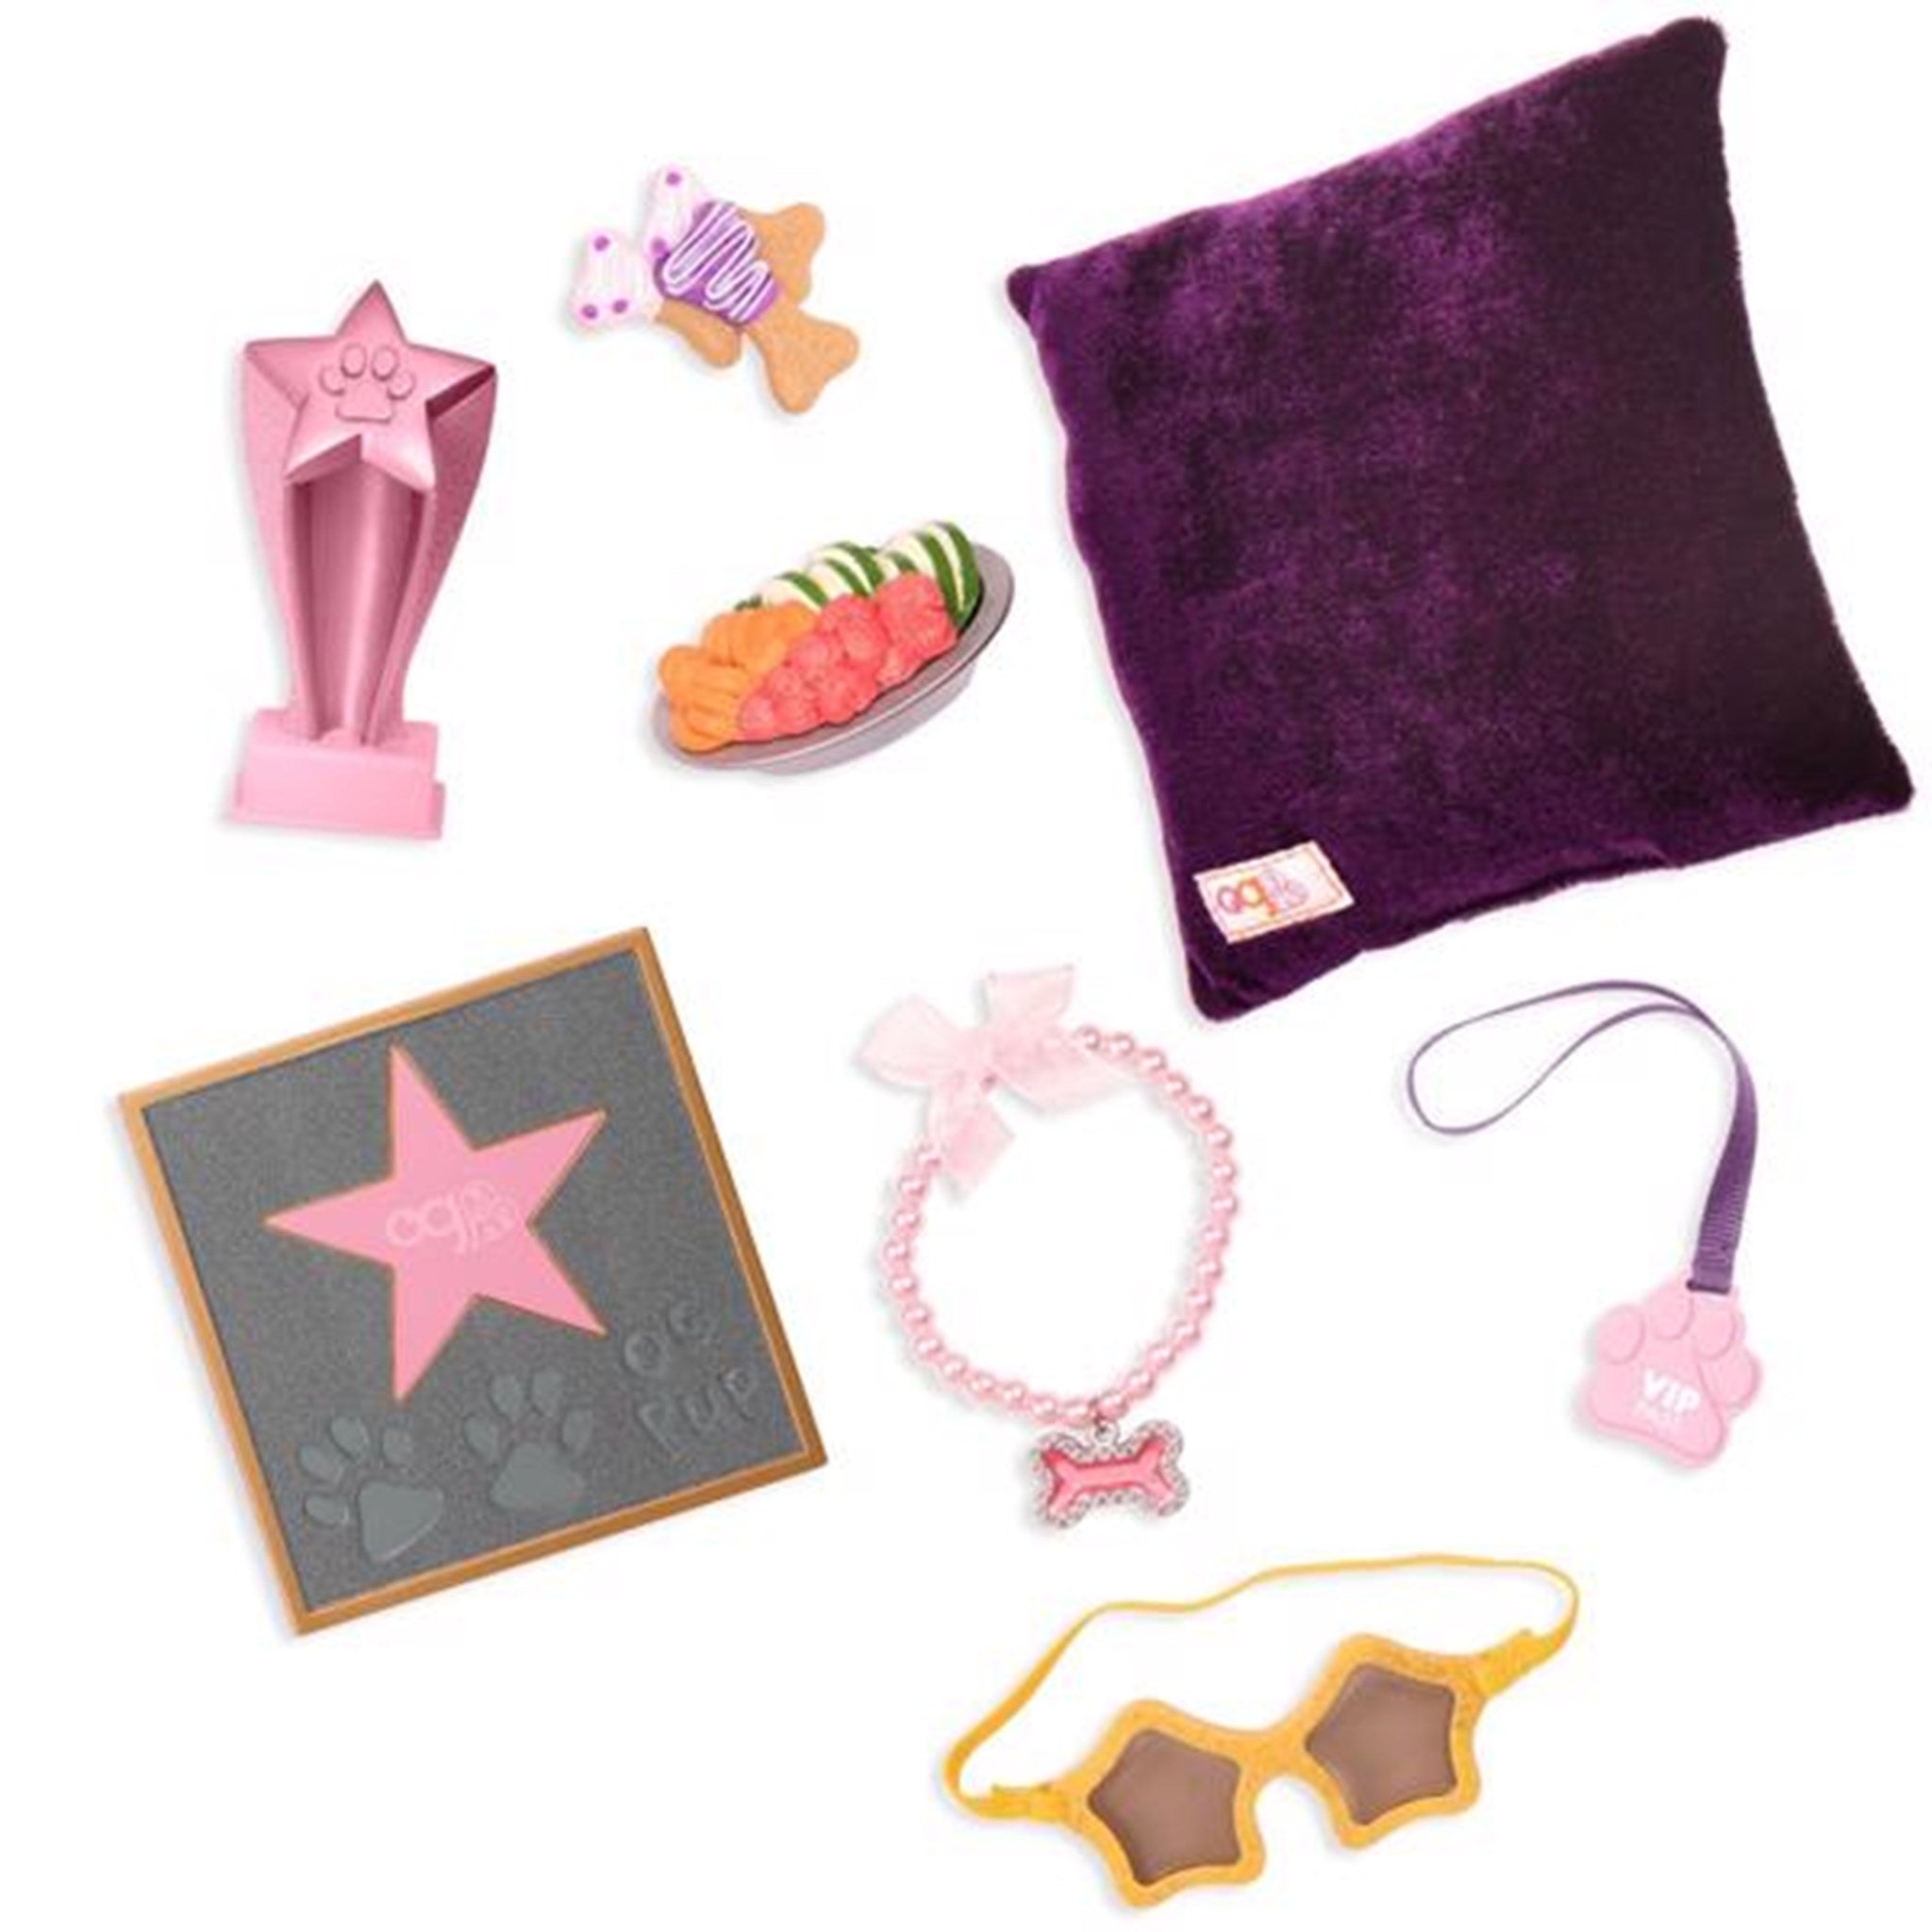 Our Generation Doll Accessories - Prices